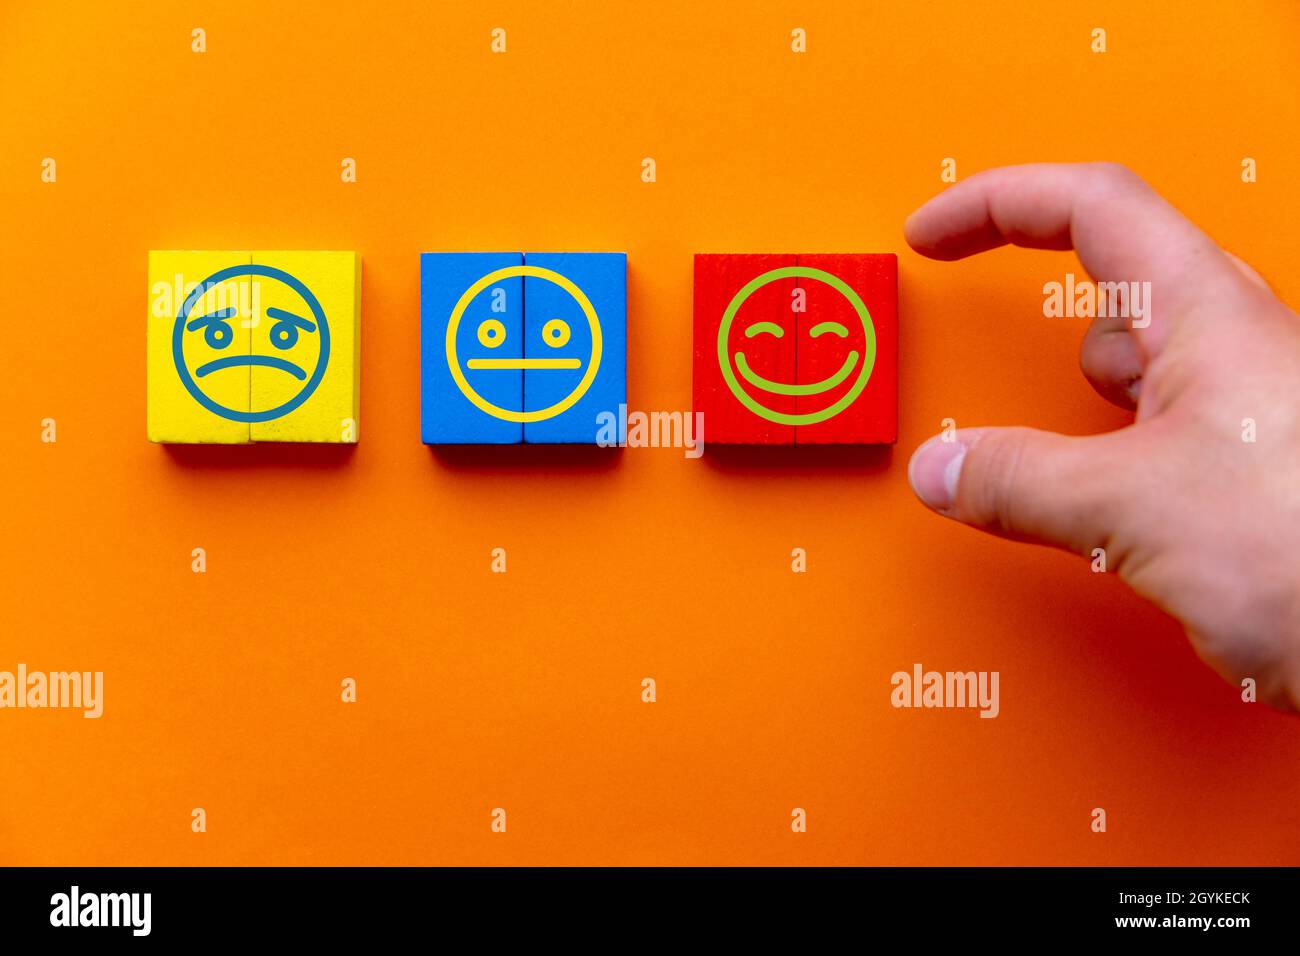 Orange background with emotion tiles to select for customer satisfaction surveys Stock Photo